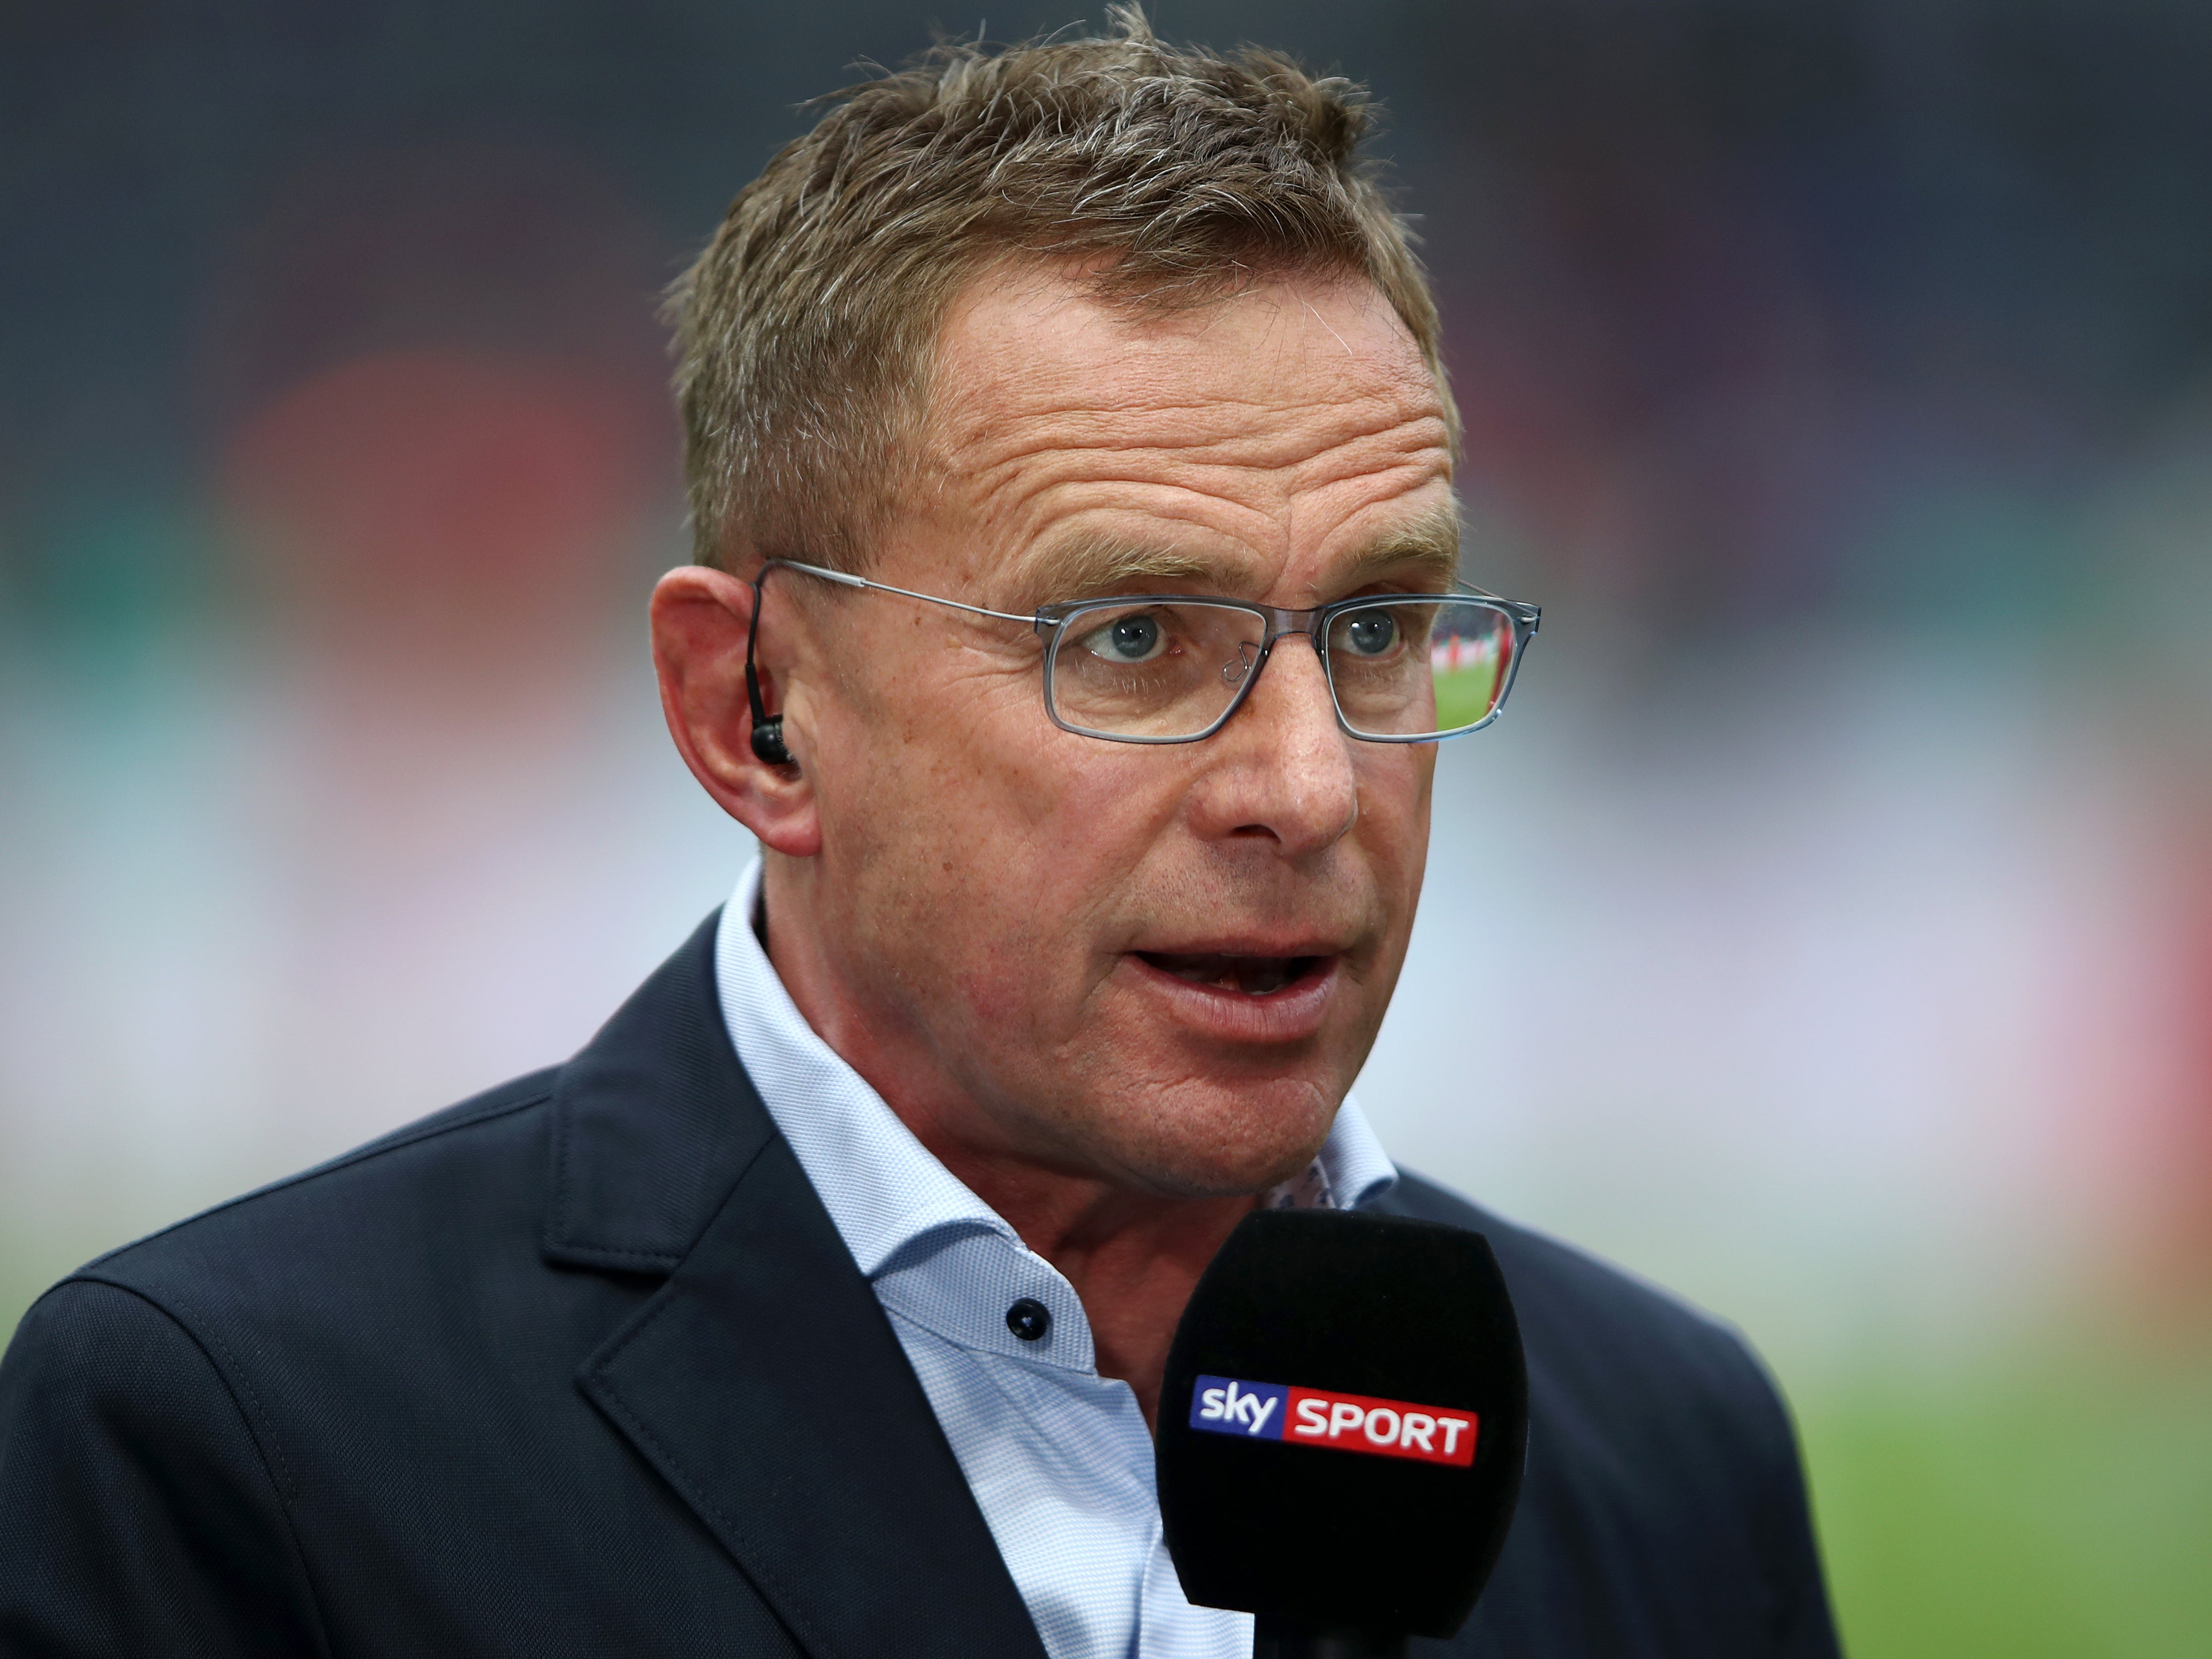 Manchester United’s incoming interim manager Ralf Rangnick